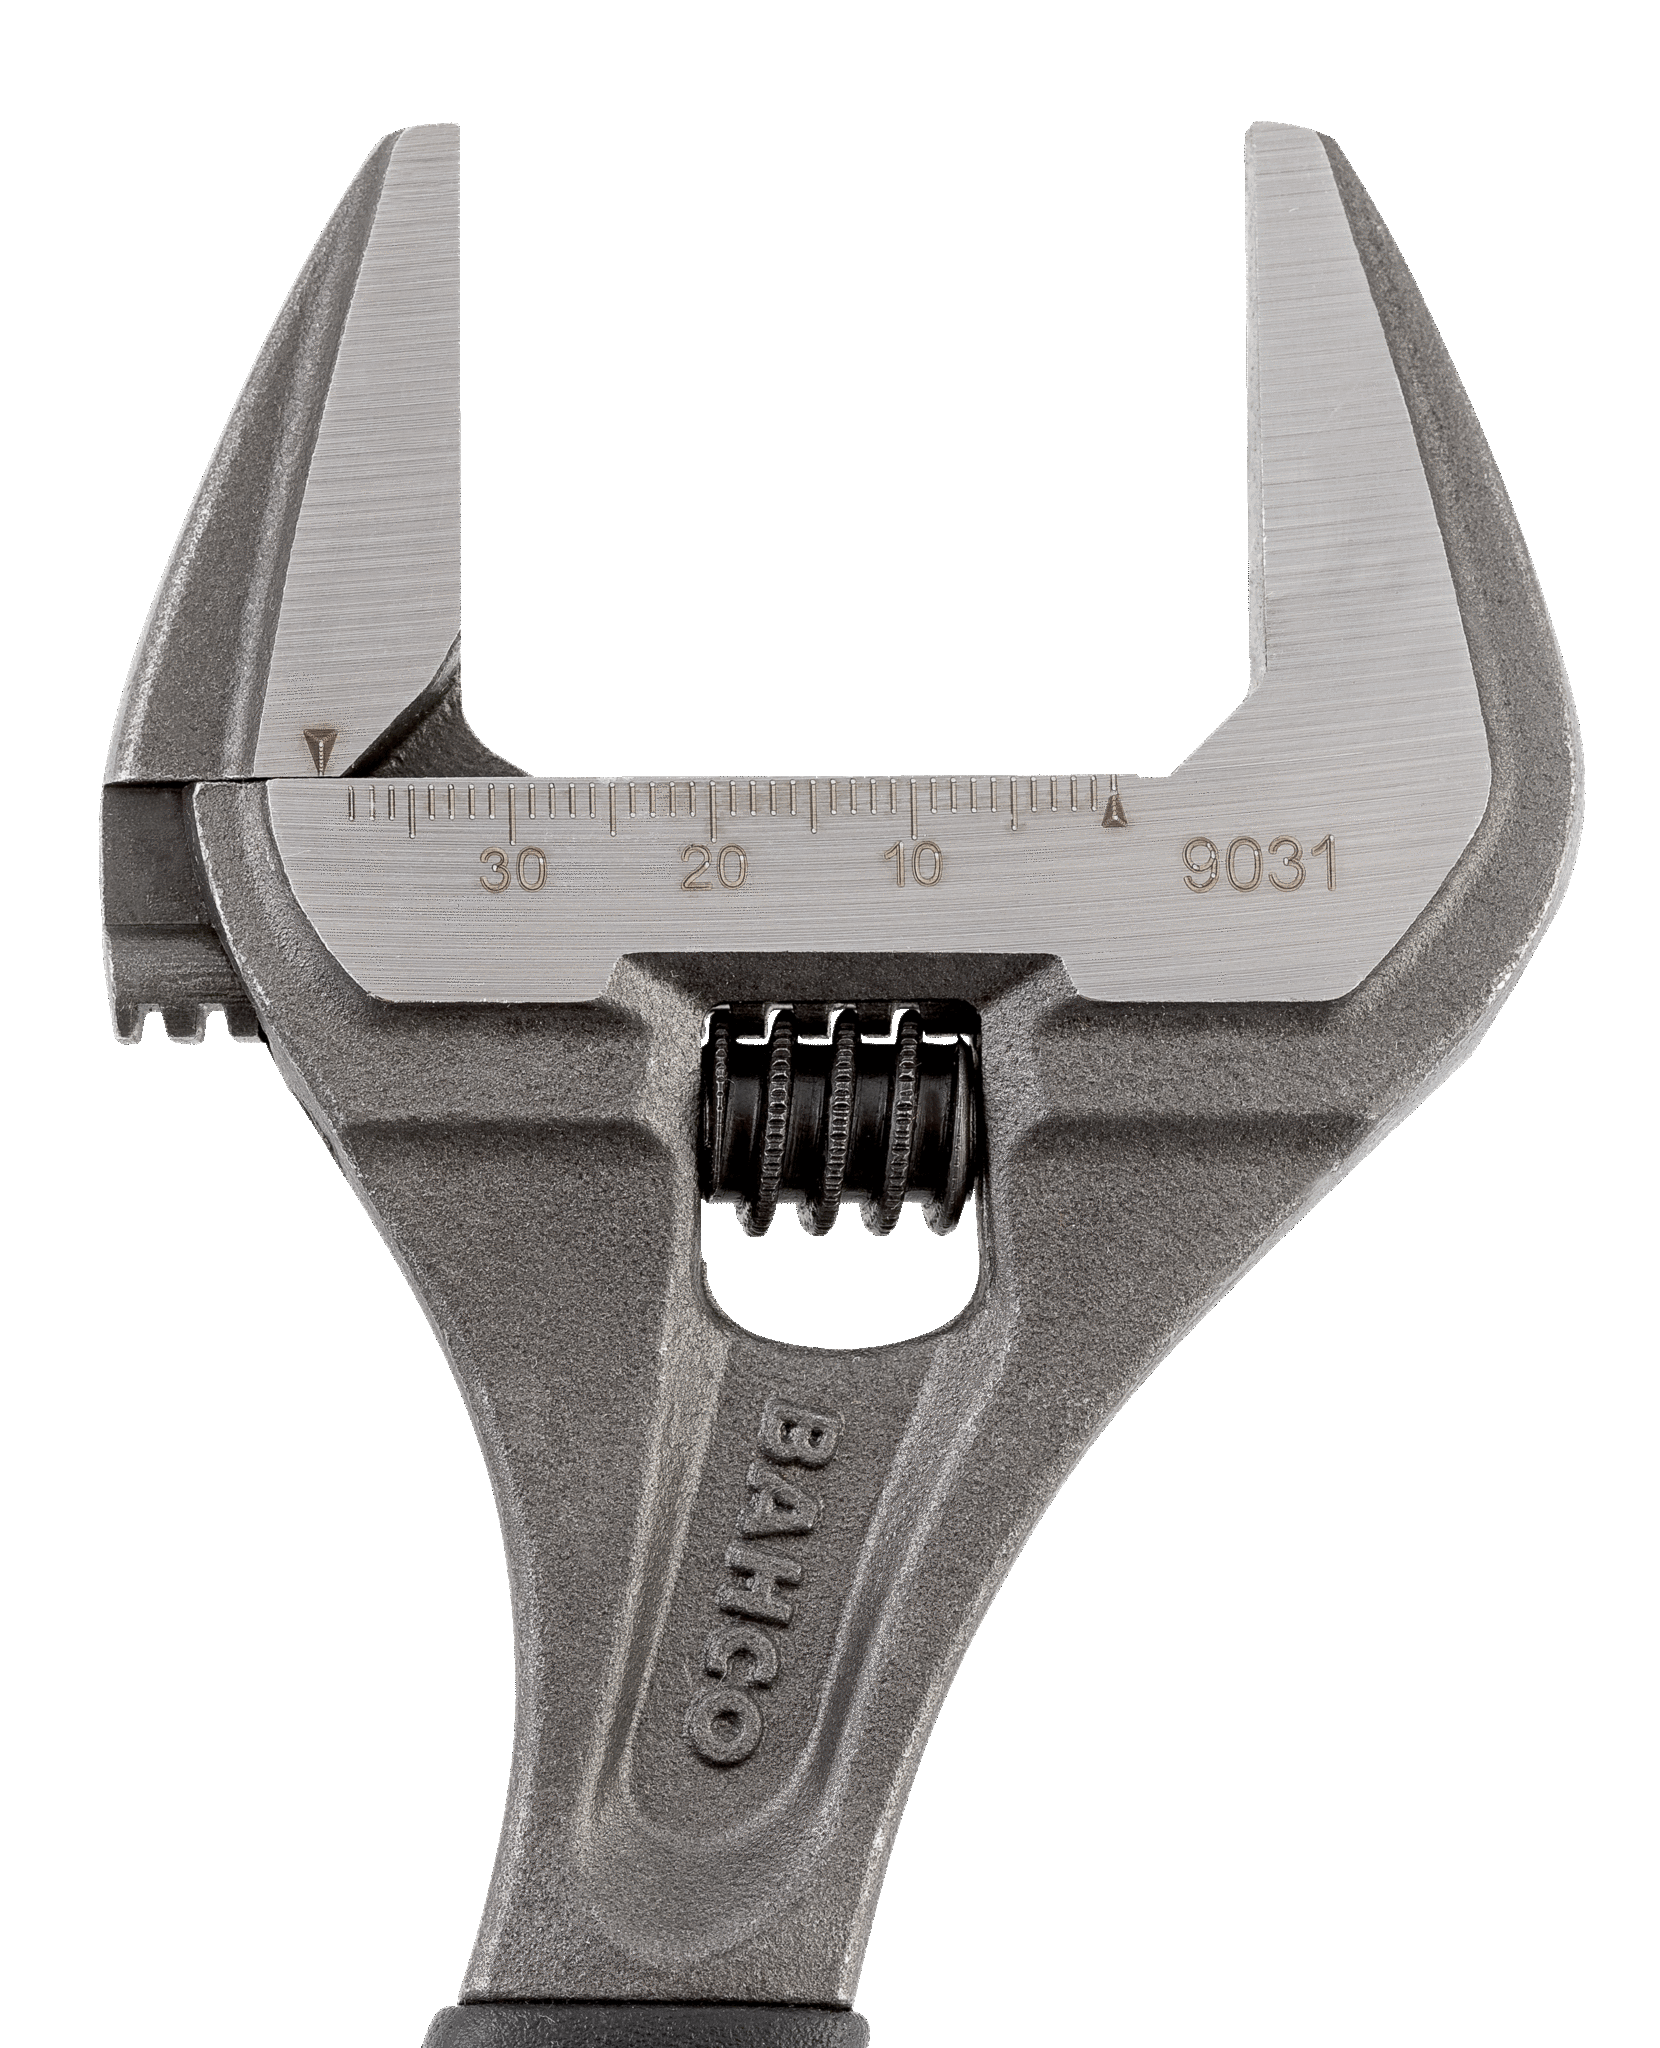 ERGO™ Central Nut Wide Opening Jaw Adjustable Wrenches with Rubber Handle and Phosphate Finish - 9031 by Bahco